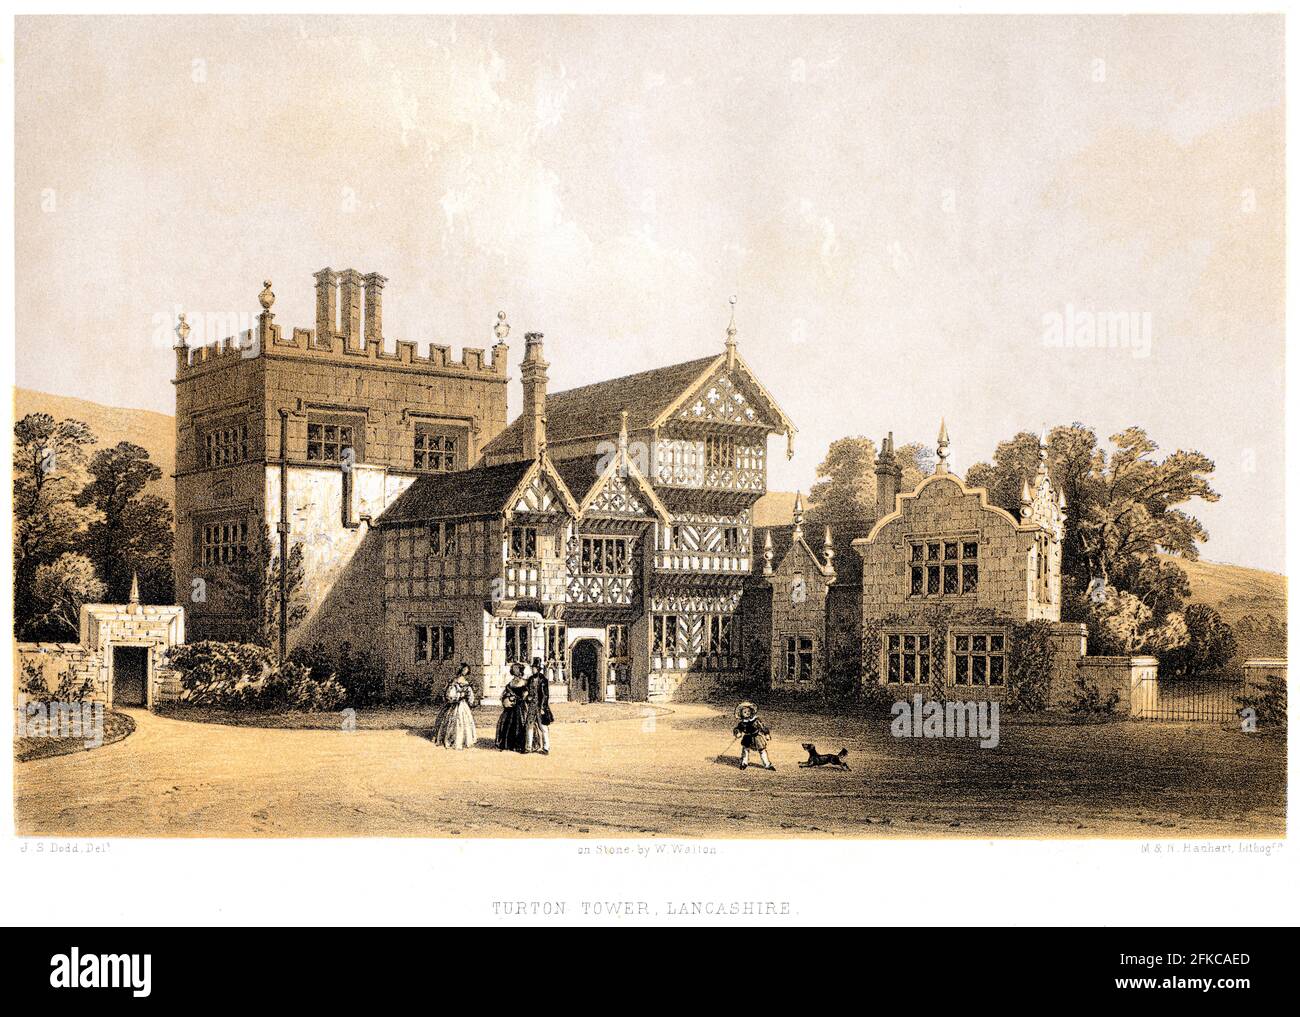 A lithotint of Turton Tower, Lancashire UK scanned at high resolution from a book printed in 1858. Believed copyright free. Stock Photo